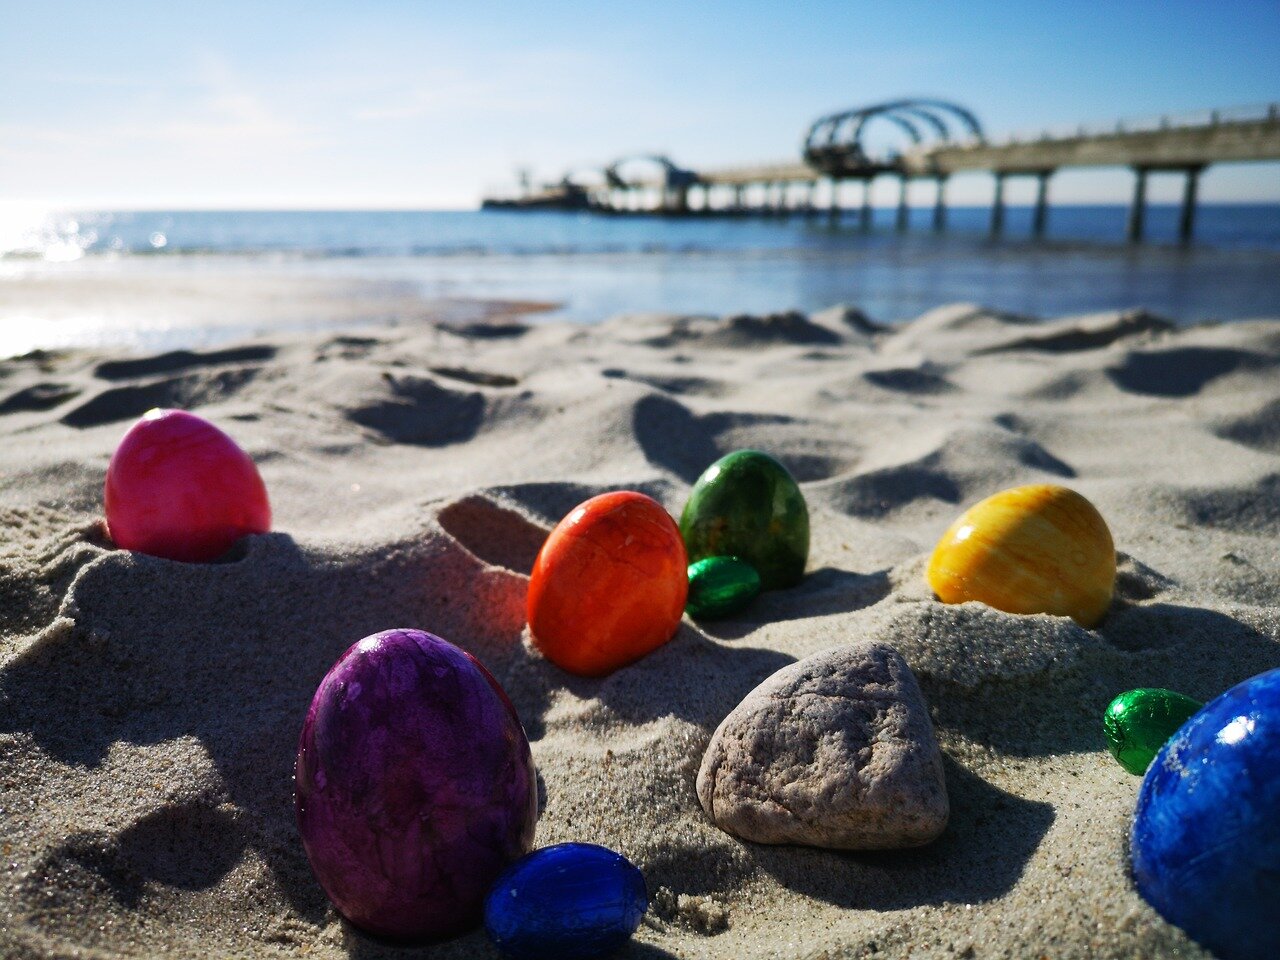 🐰🌸 Wishing you a day filled with joy, love, and plenty of Easter egg hunts! Happy Easter from all of us at Cape May Beach House! 🌼🥚 #HappyEaster #EasterJoy #SpringTime